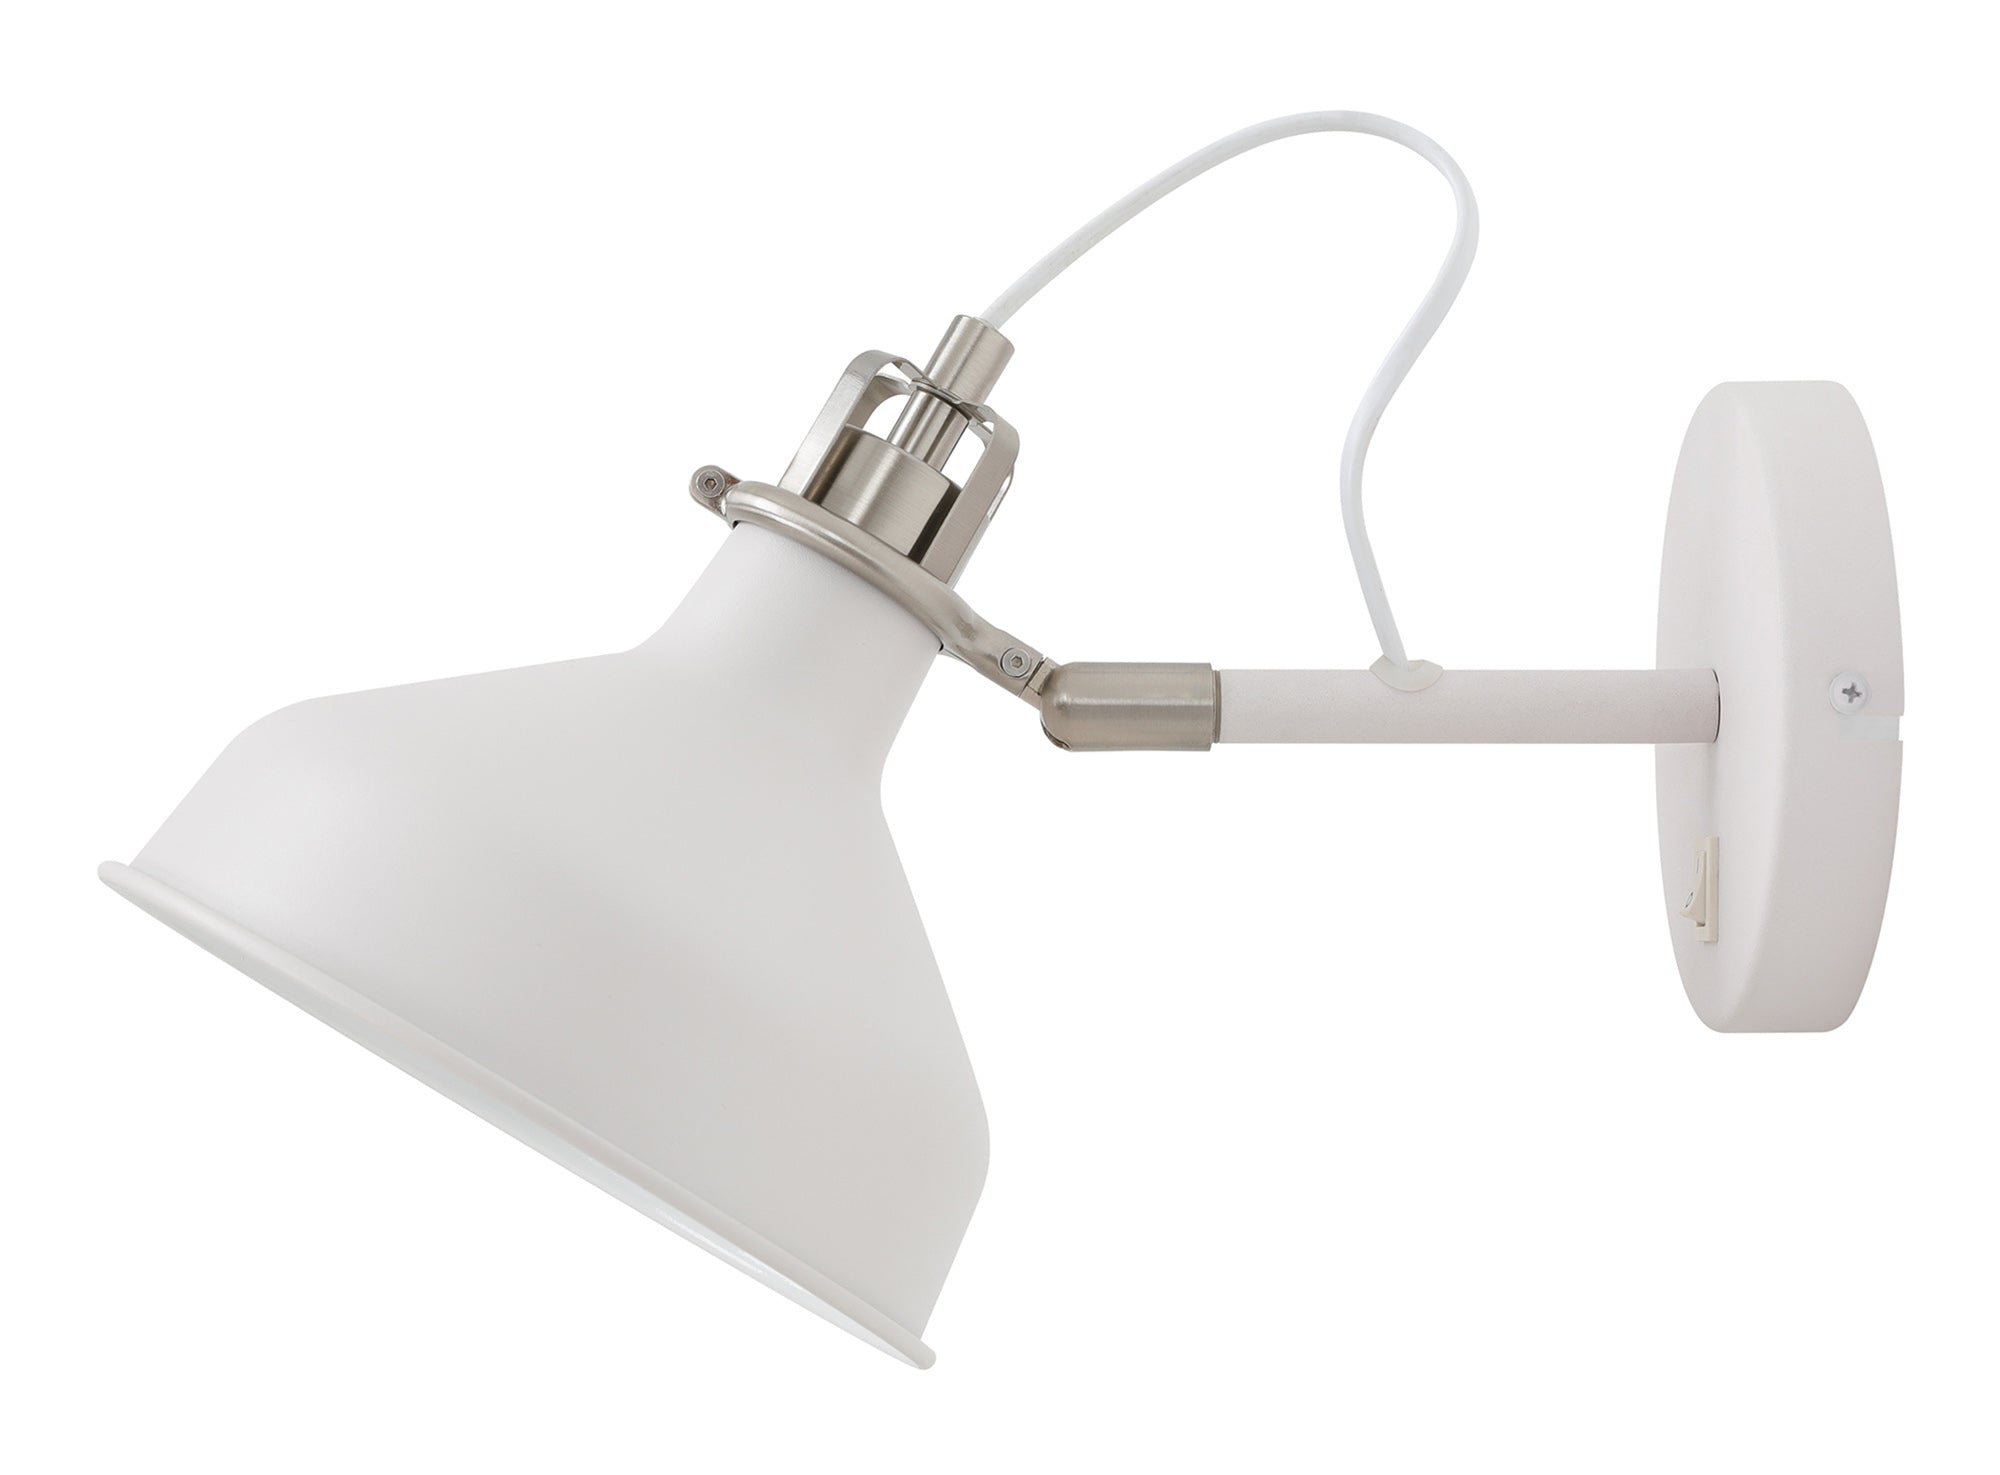 Banker Adjustable Wall Lamp Switched, 1 x E27, Sand White/Satin Nickel/White